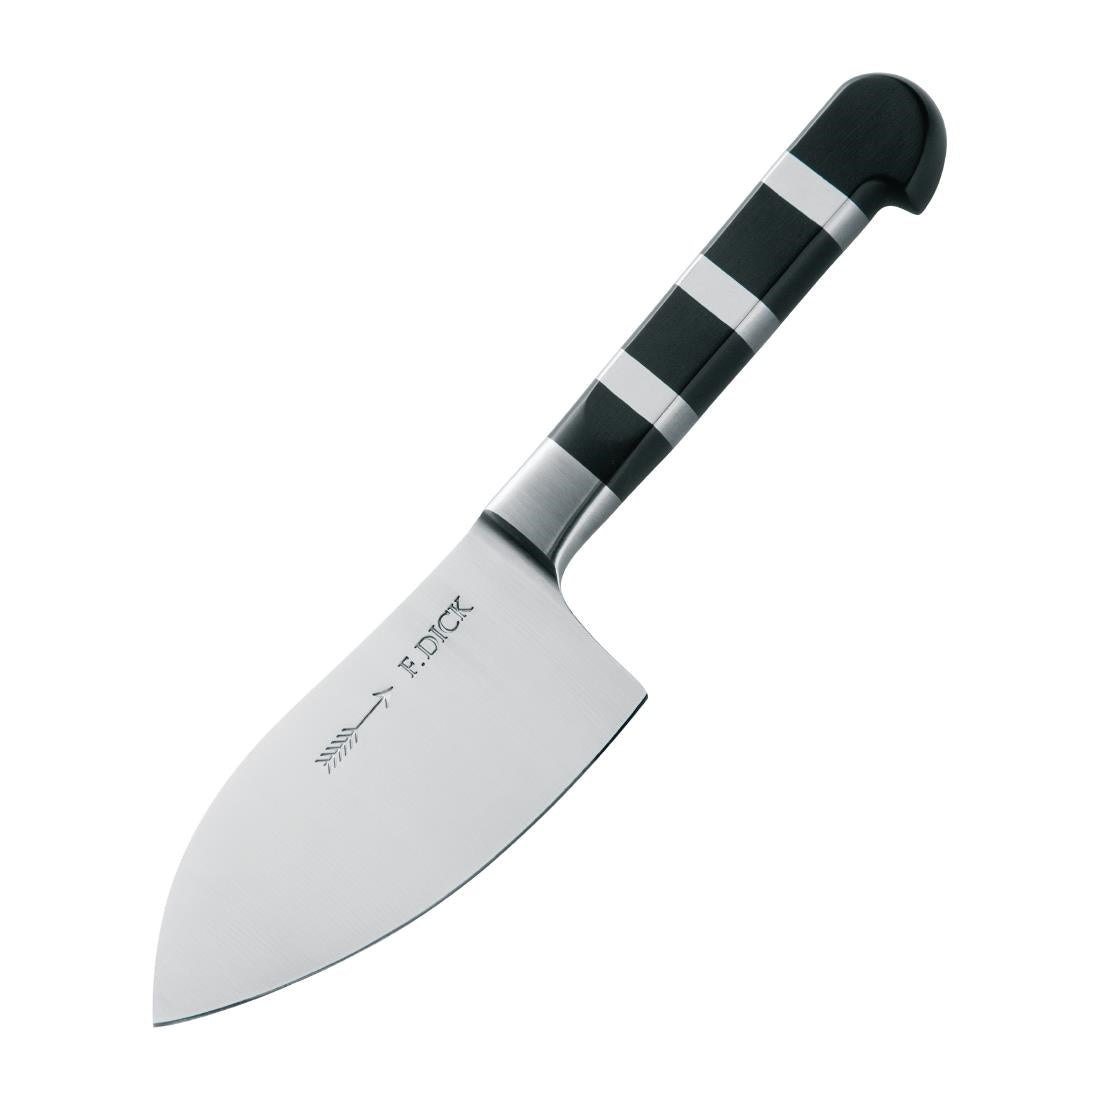 DE370 Dick 1905 Fully Forged Herb and Parmesan Knife 12cm JD Catering Equipment Solutions Ltd